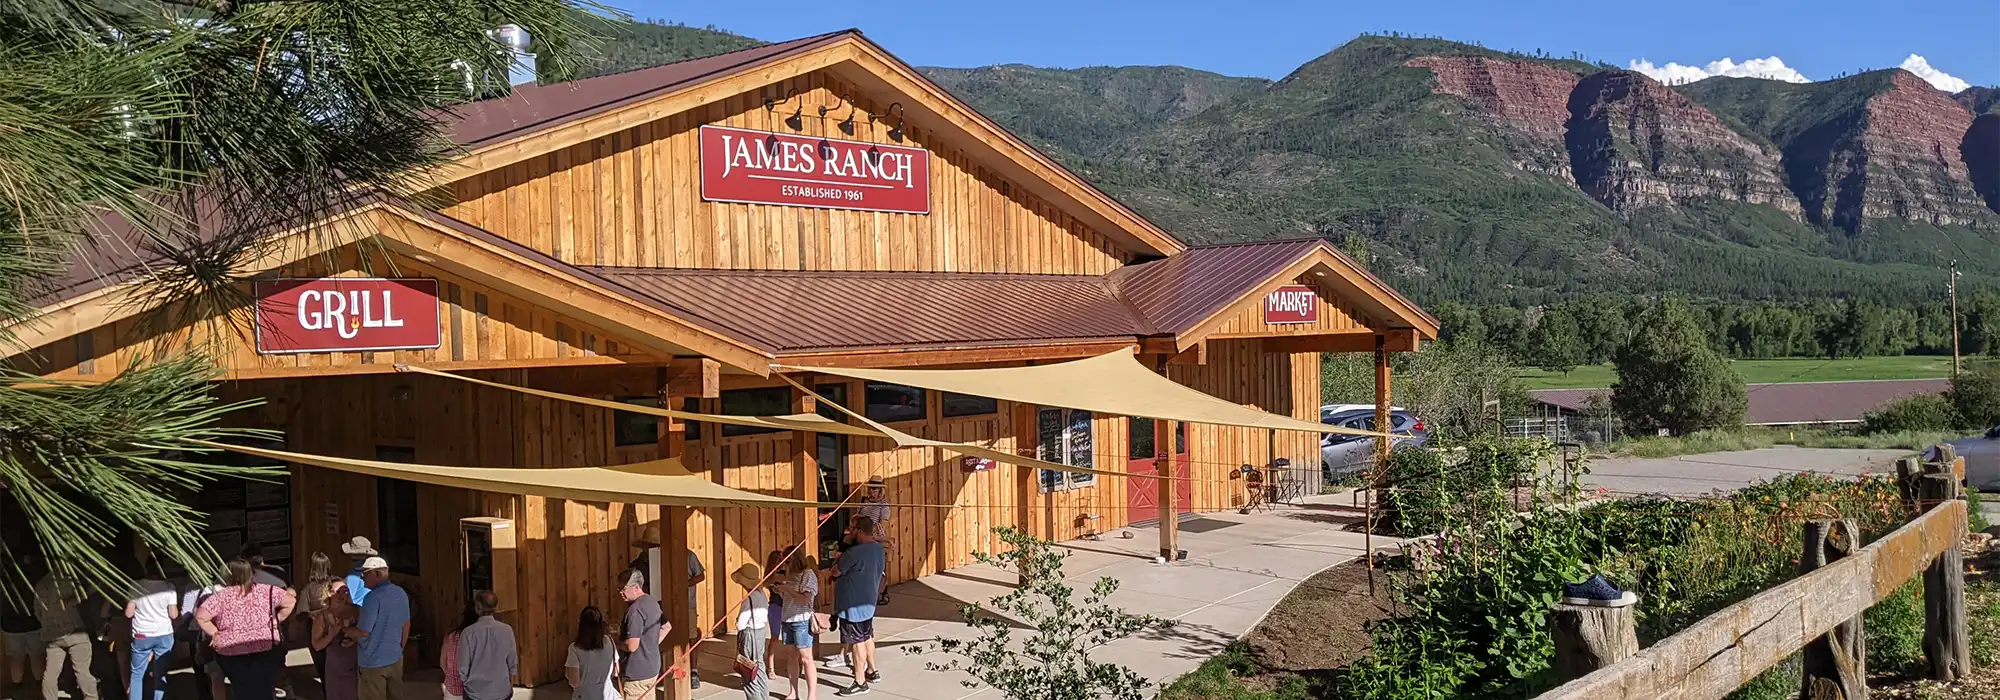 james ranch grill and market